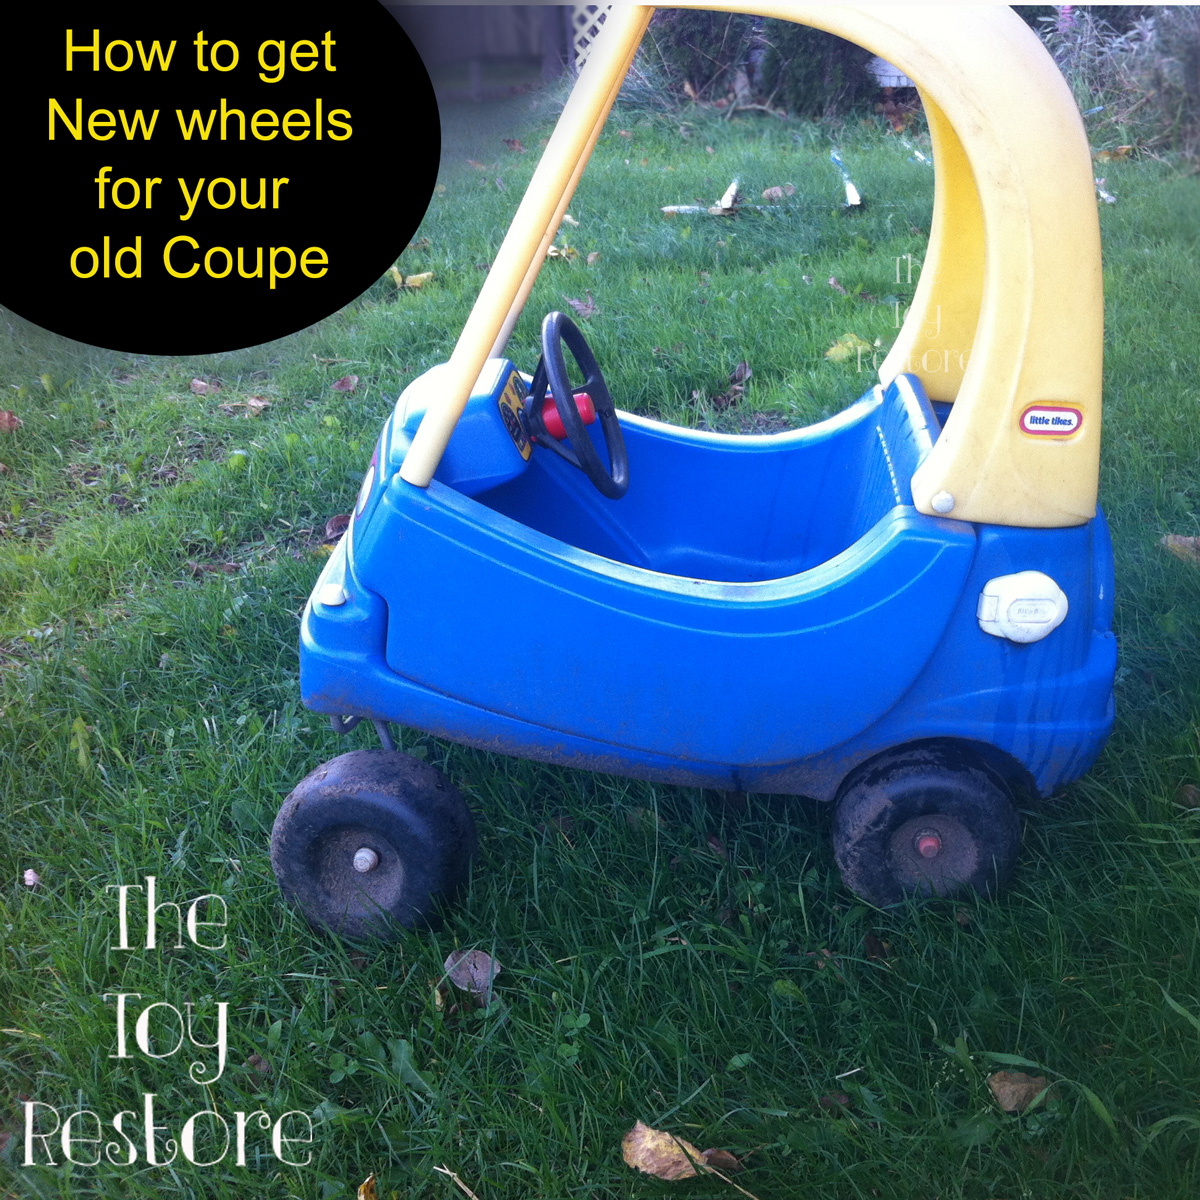 How to Fix Little Tikes Cozy Coupe Wheels or Tires : Replace a missing tire with new parts